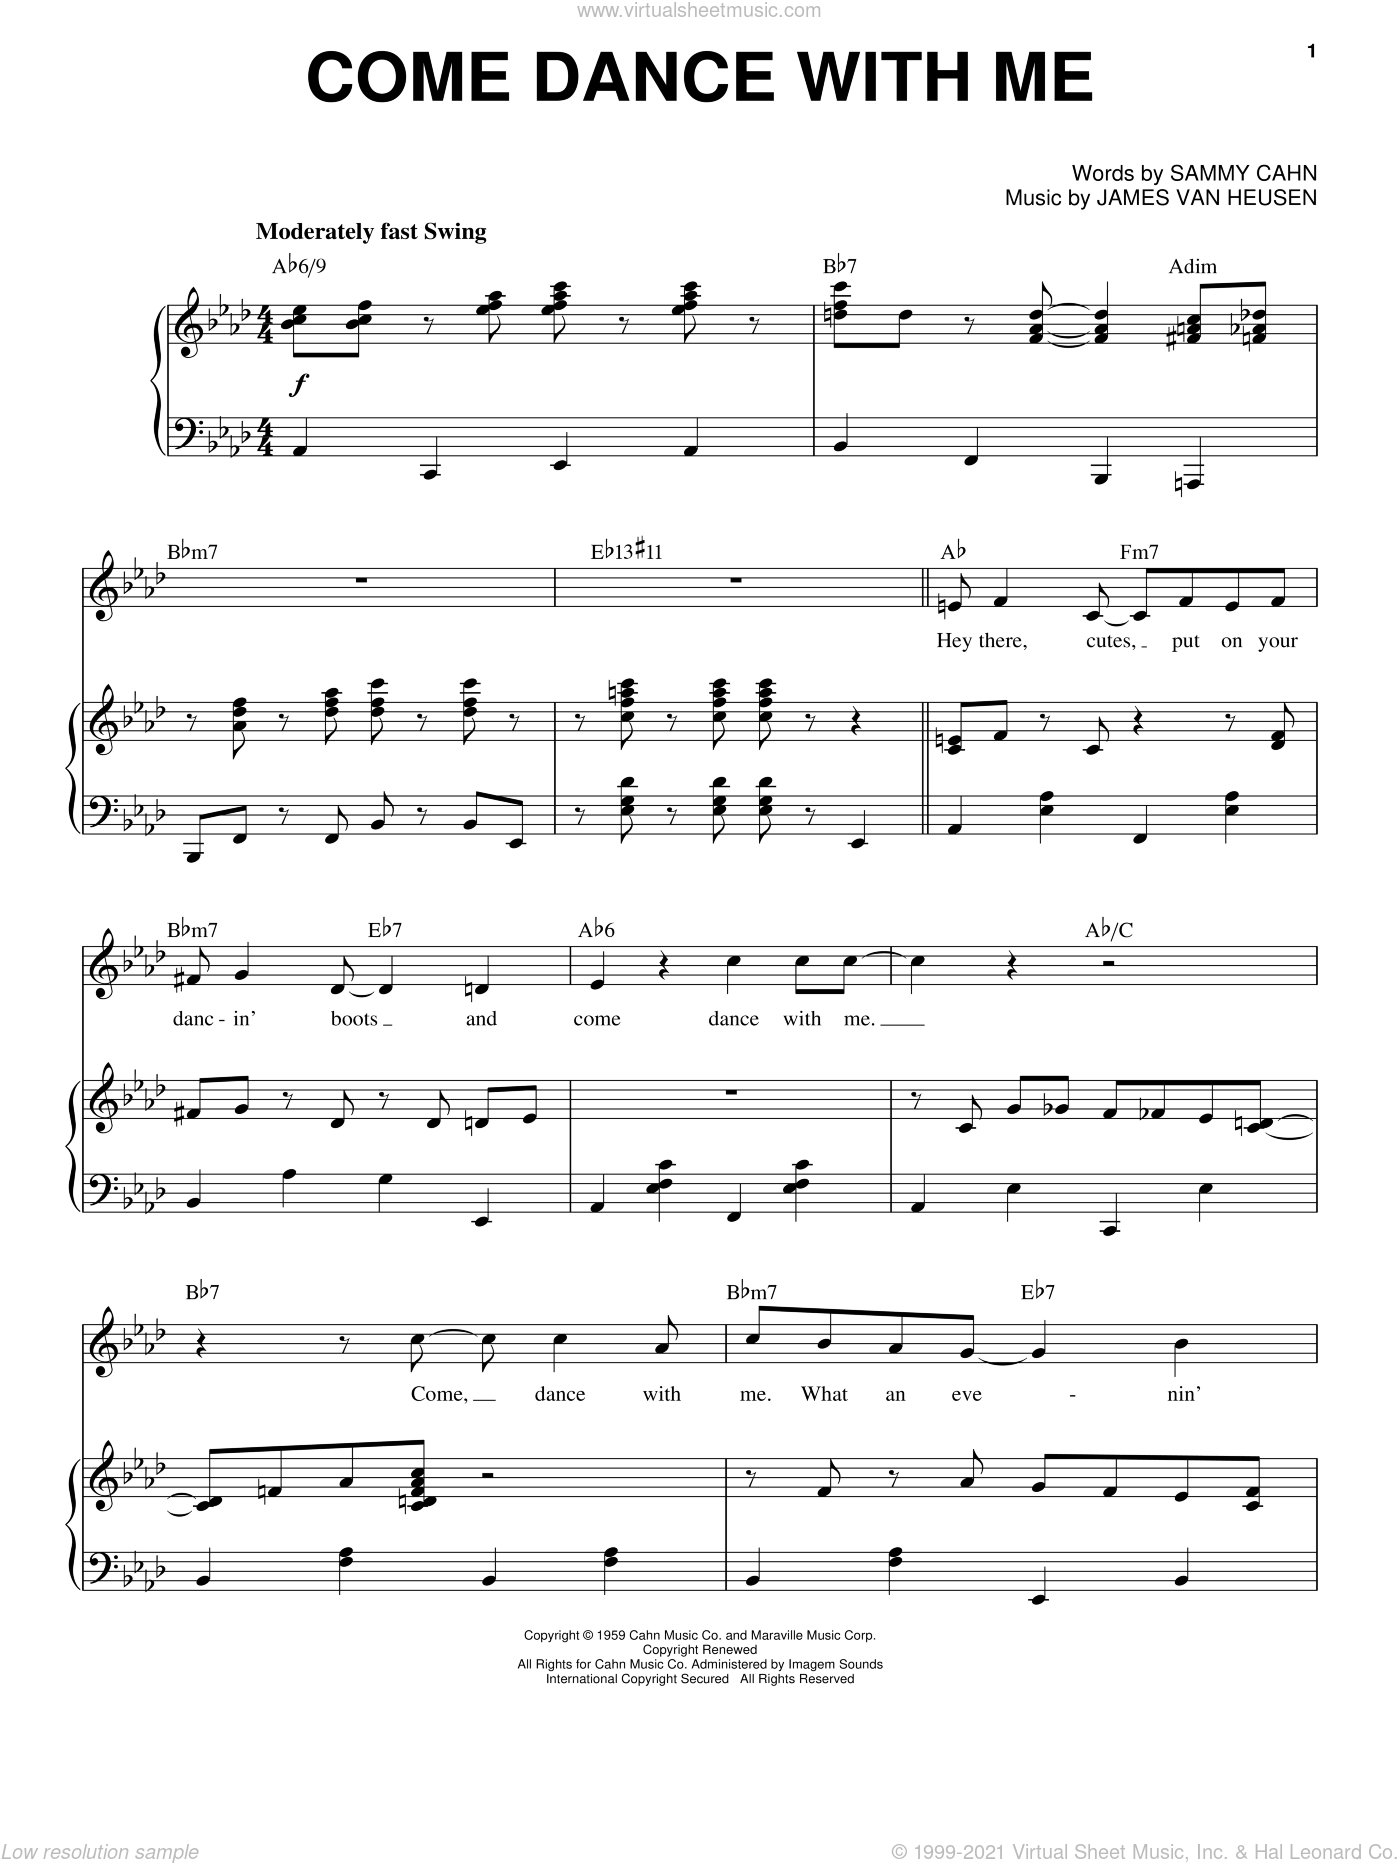 Fresh Music Sheet Collection Because Of You By2 Piano Sheet Music